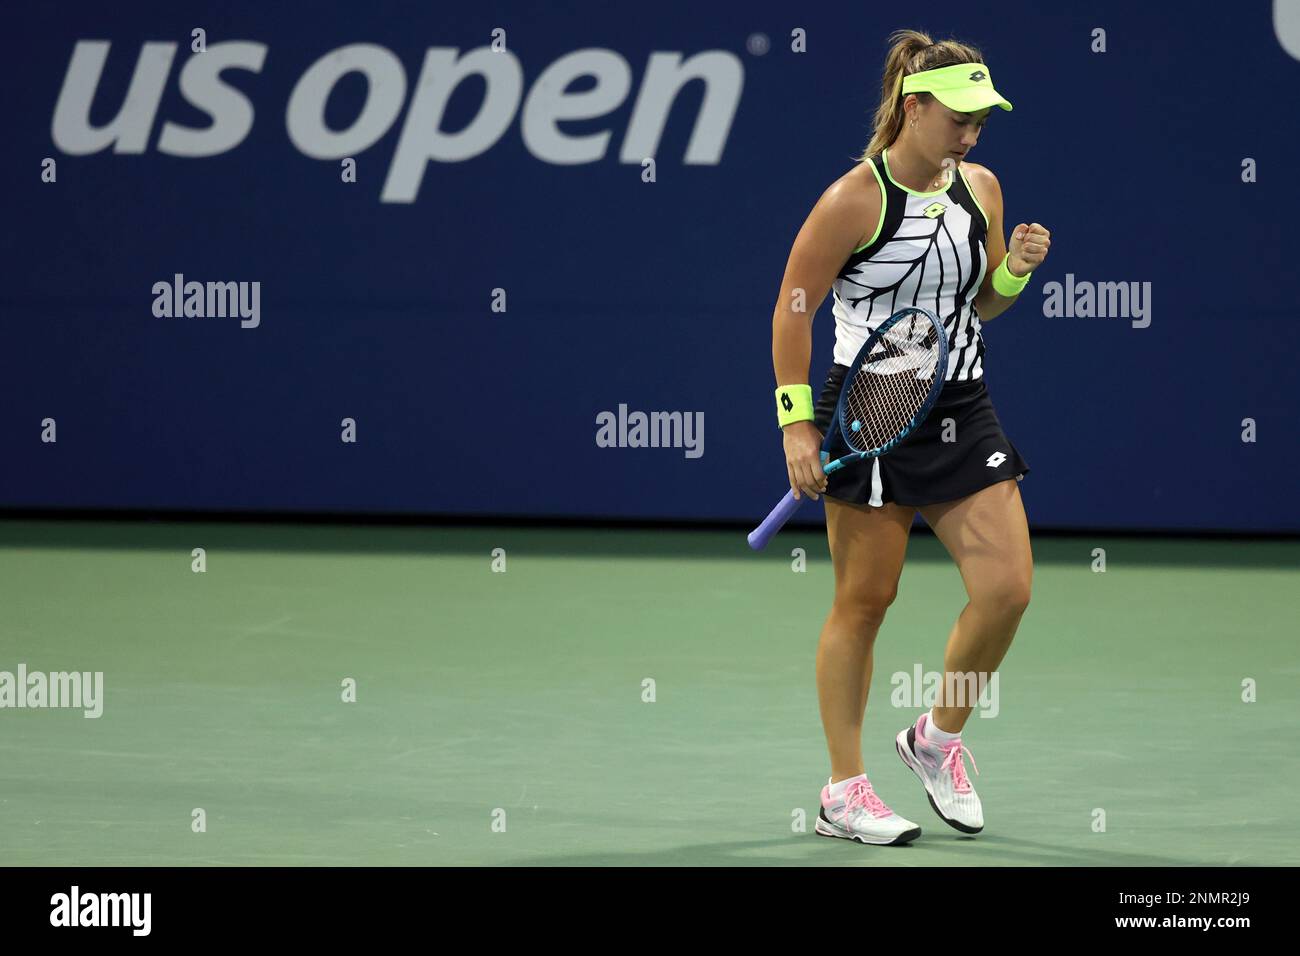 Danka Kovinic reacts during a Womens Singles match at the 2021 US Open, Tuesday, Aug